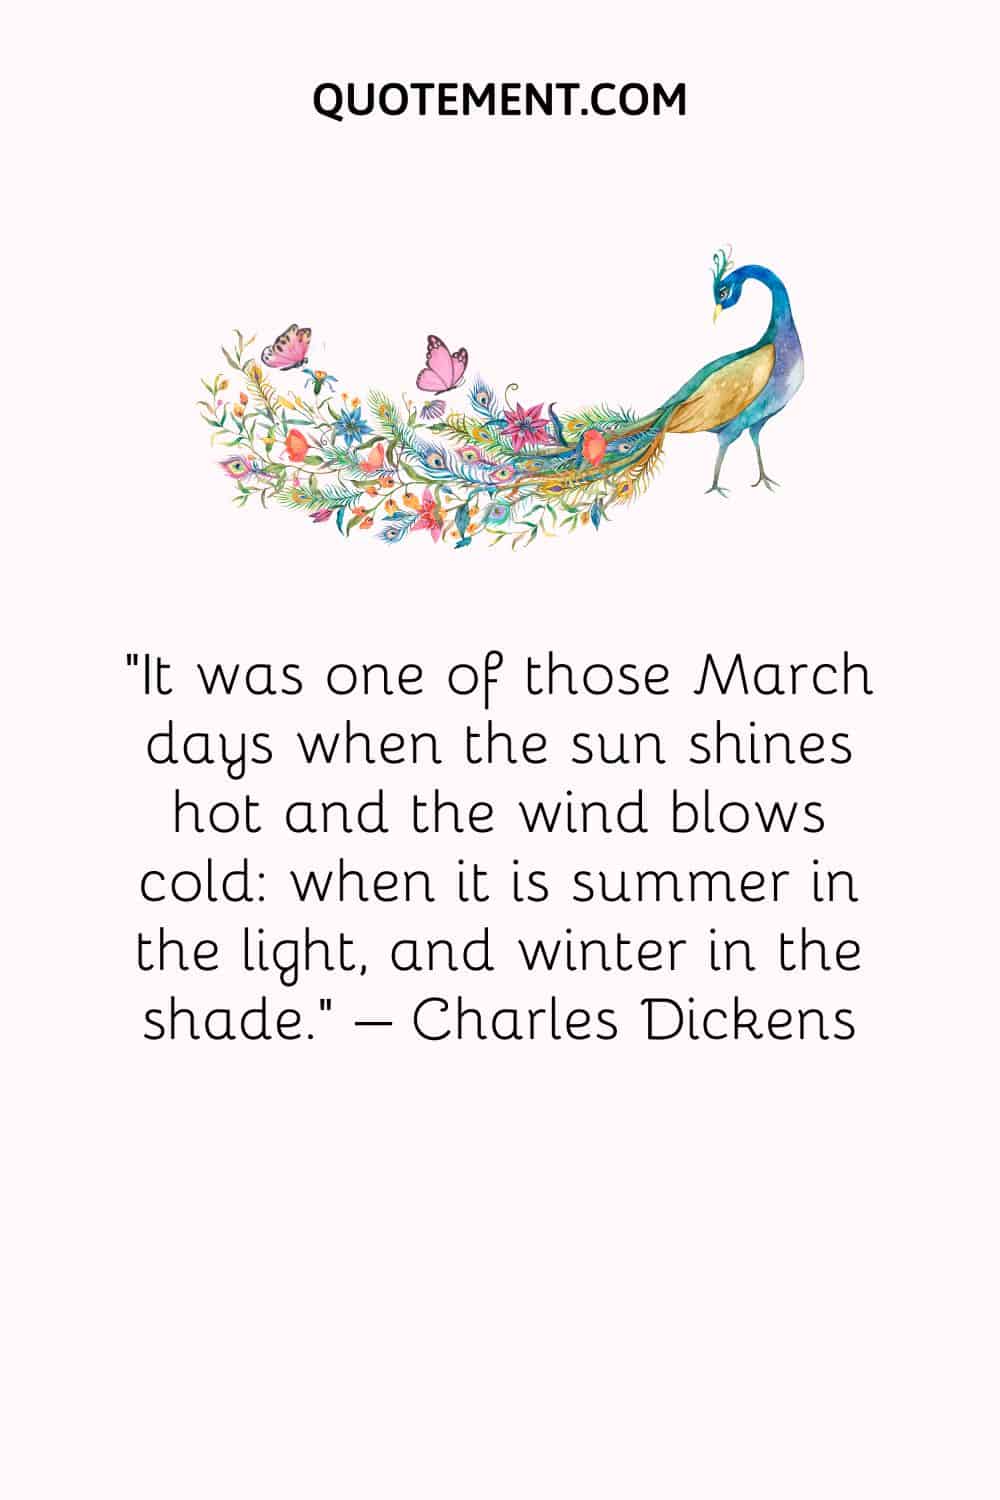 It was one of those March days when the sun shines hot and the wind blows cold when it is summer in the light, and winter in the shade. – Charles Dickens